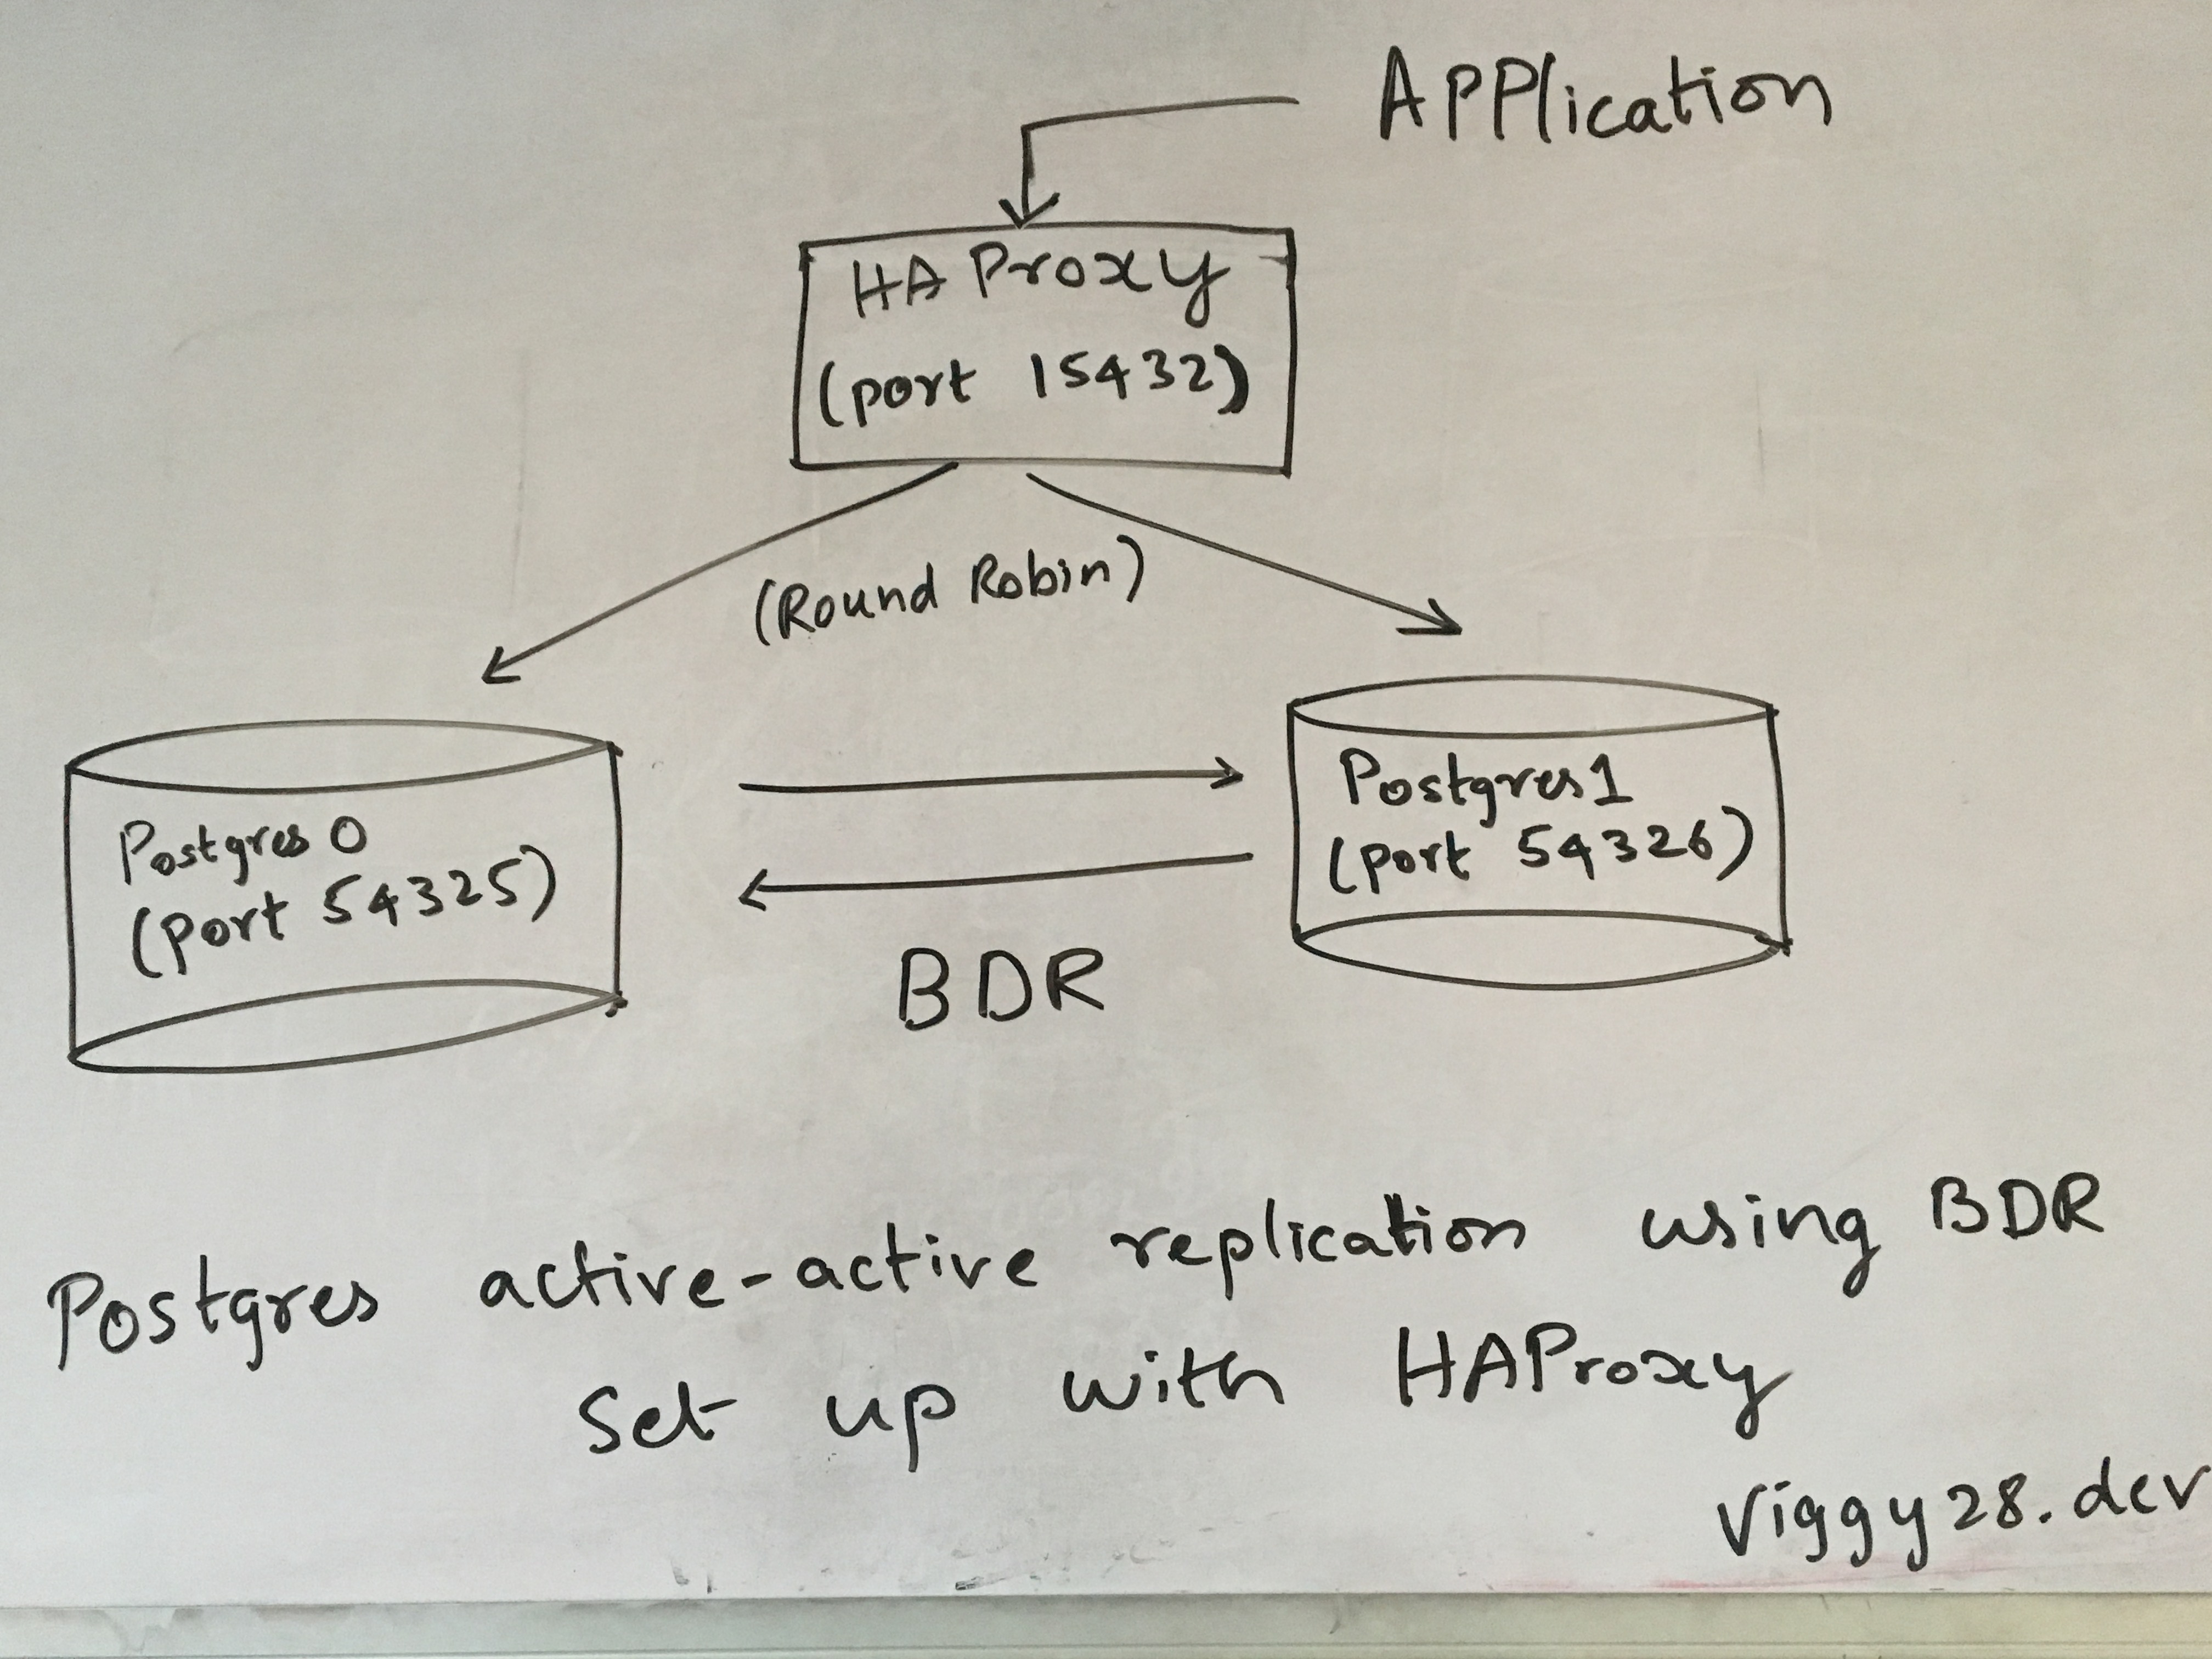 Postgres active-active replication using BDR set up with HAProxy